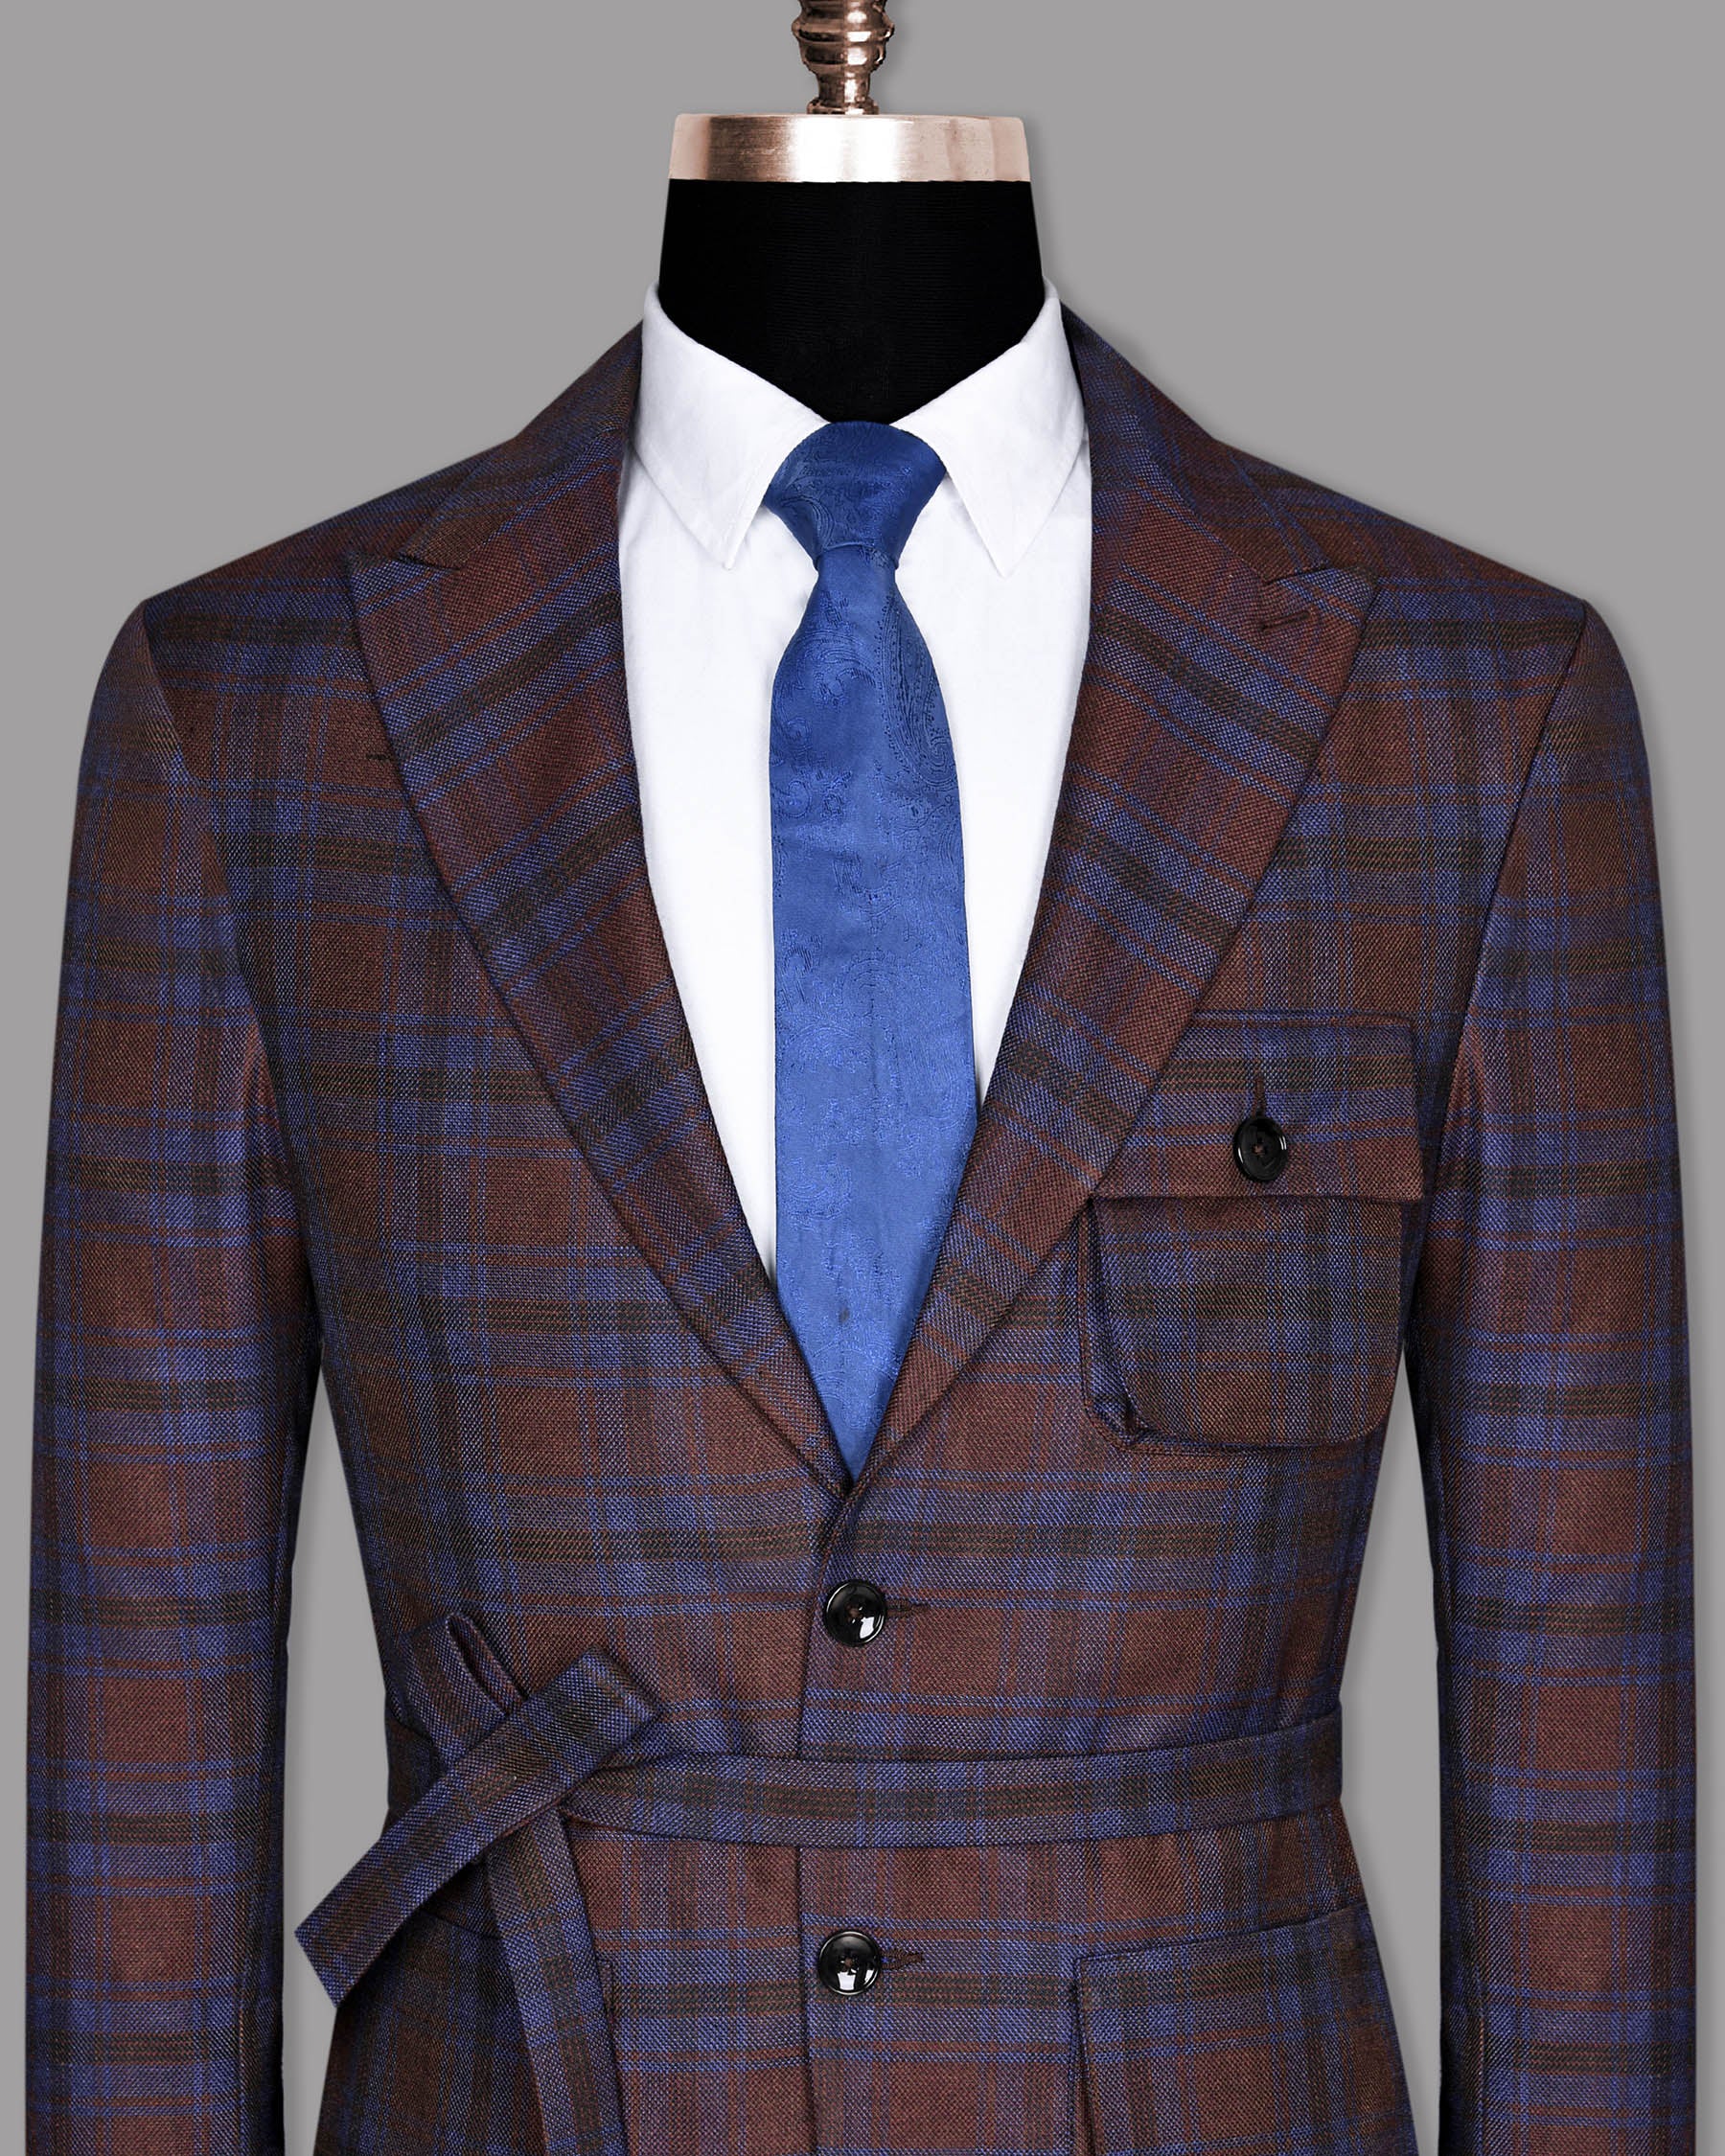 Maroon with Royal Blue Plaid Striped Wool Tweed Blazer BL685-D9-36, BL685-D9-38, BL685-D9-56, BL685-D9-40, BL685-D9-42, BL685-D9-44, BL685-D9-46, BL685-D9-48, BL685-D9-50, BL685-D9-54, BL685-D9-58, BL685-D9-60, BL685-D9-52